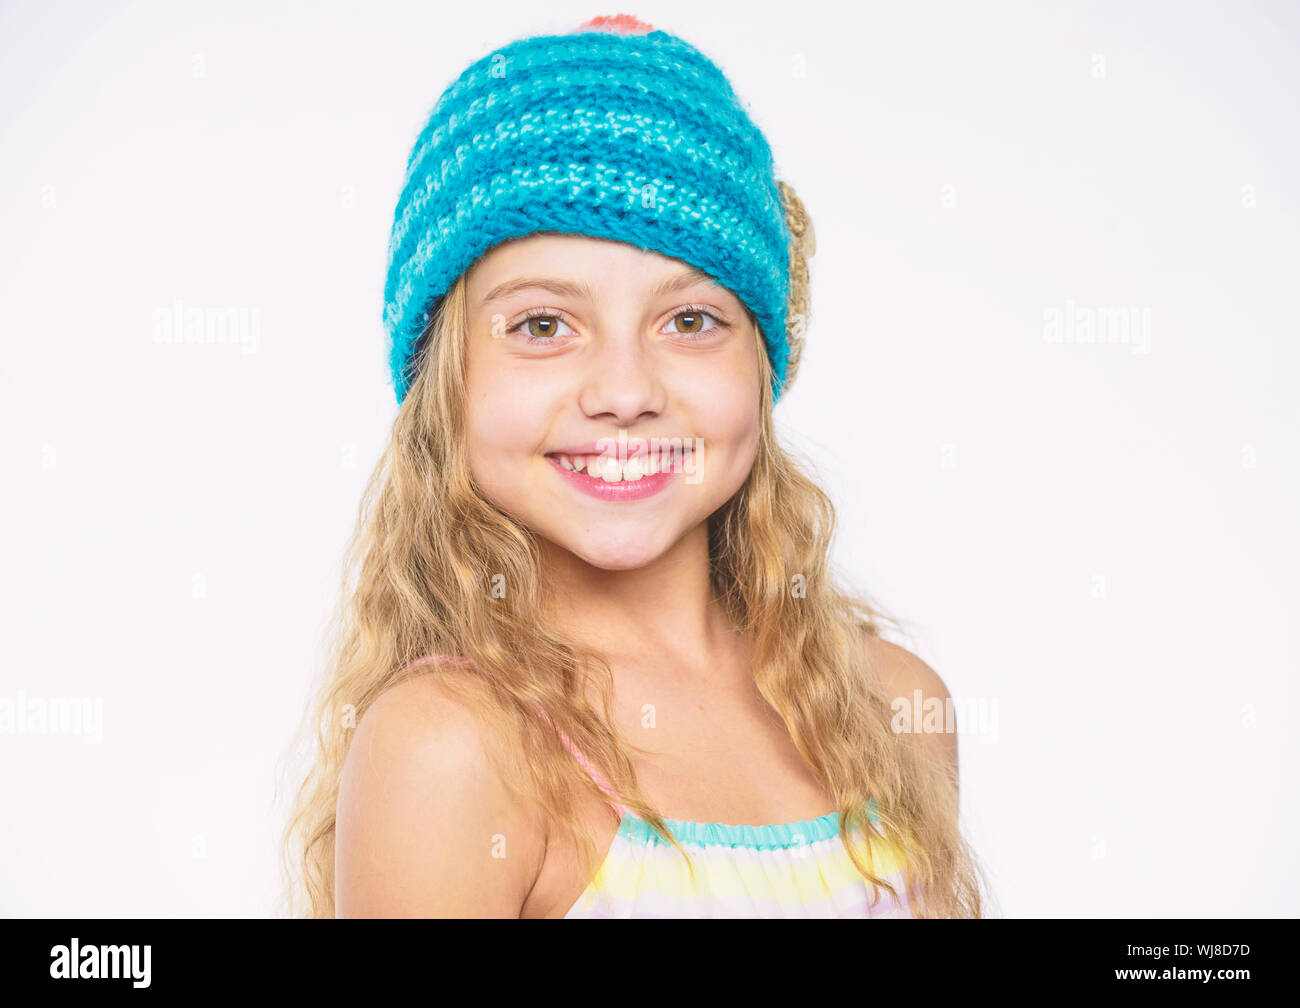 Childrens Knitted Hats Girl Long Hair Happy Face White